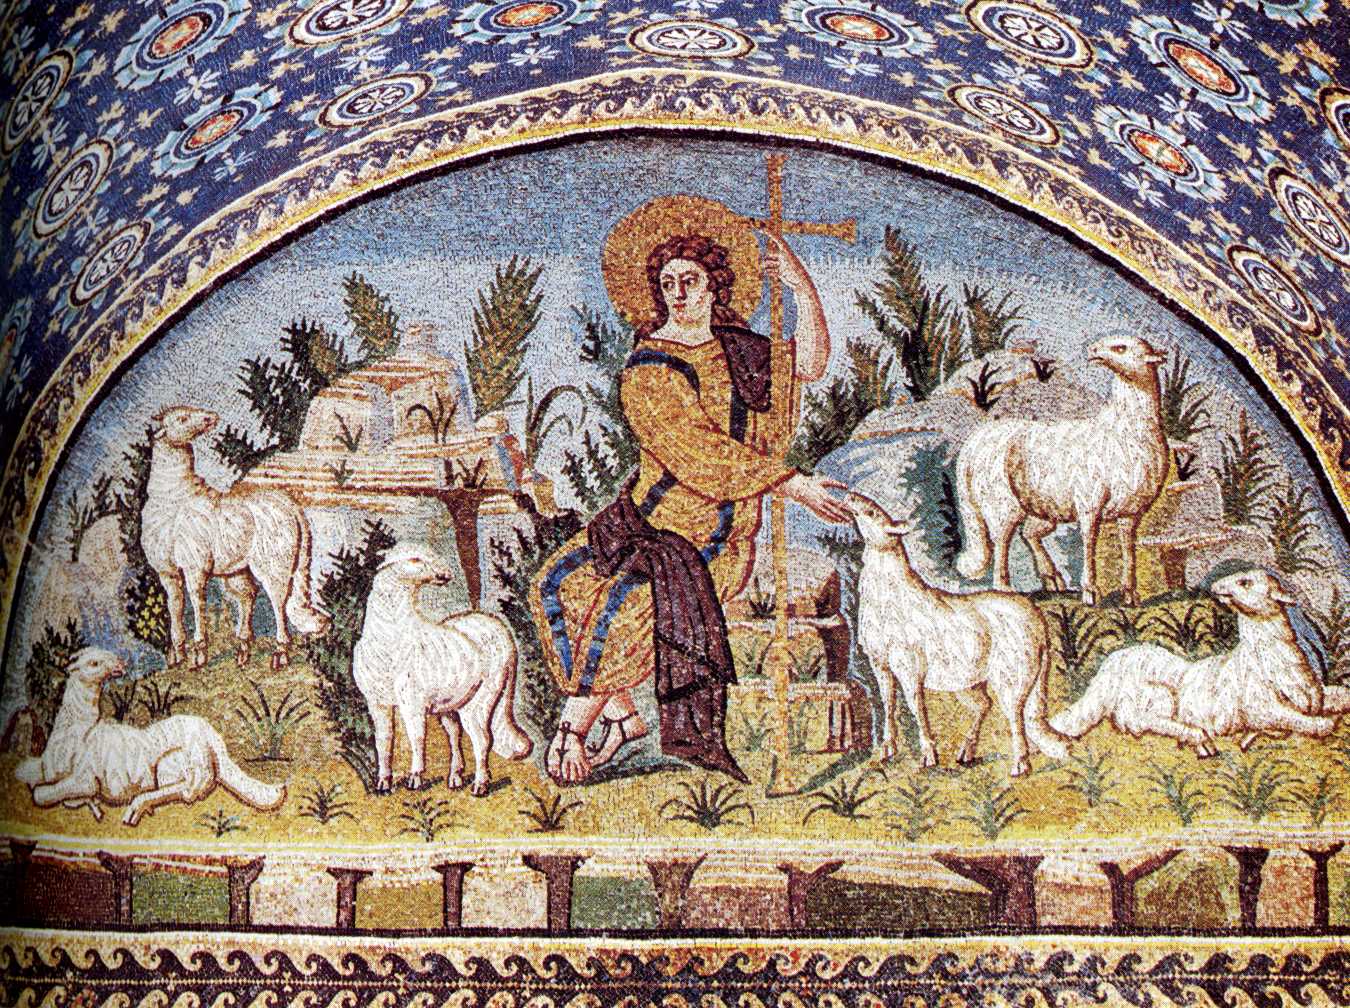 <p>The Good Shepherd is a common motif from the Catacombs of Rome and in sarcophagus reliefs, where Christian and pagan symbolism are often combined, making secure identifications difficult.</p>